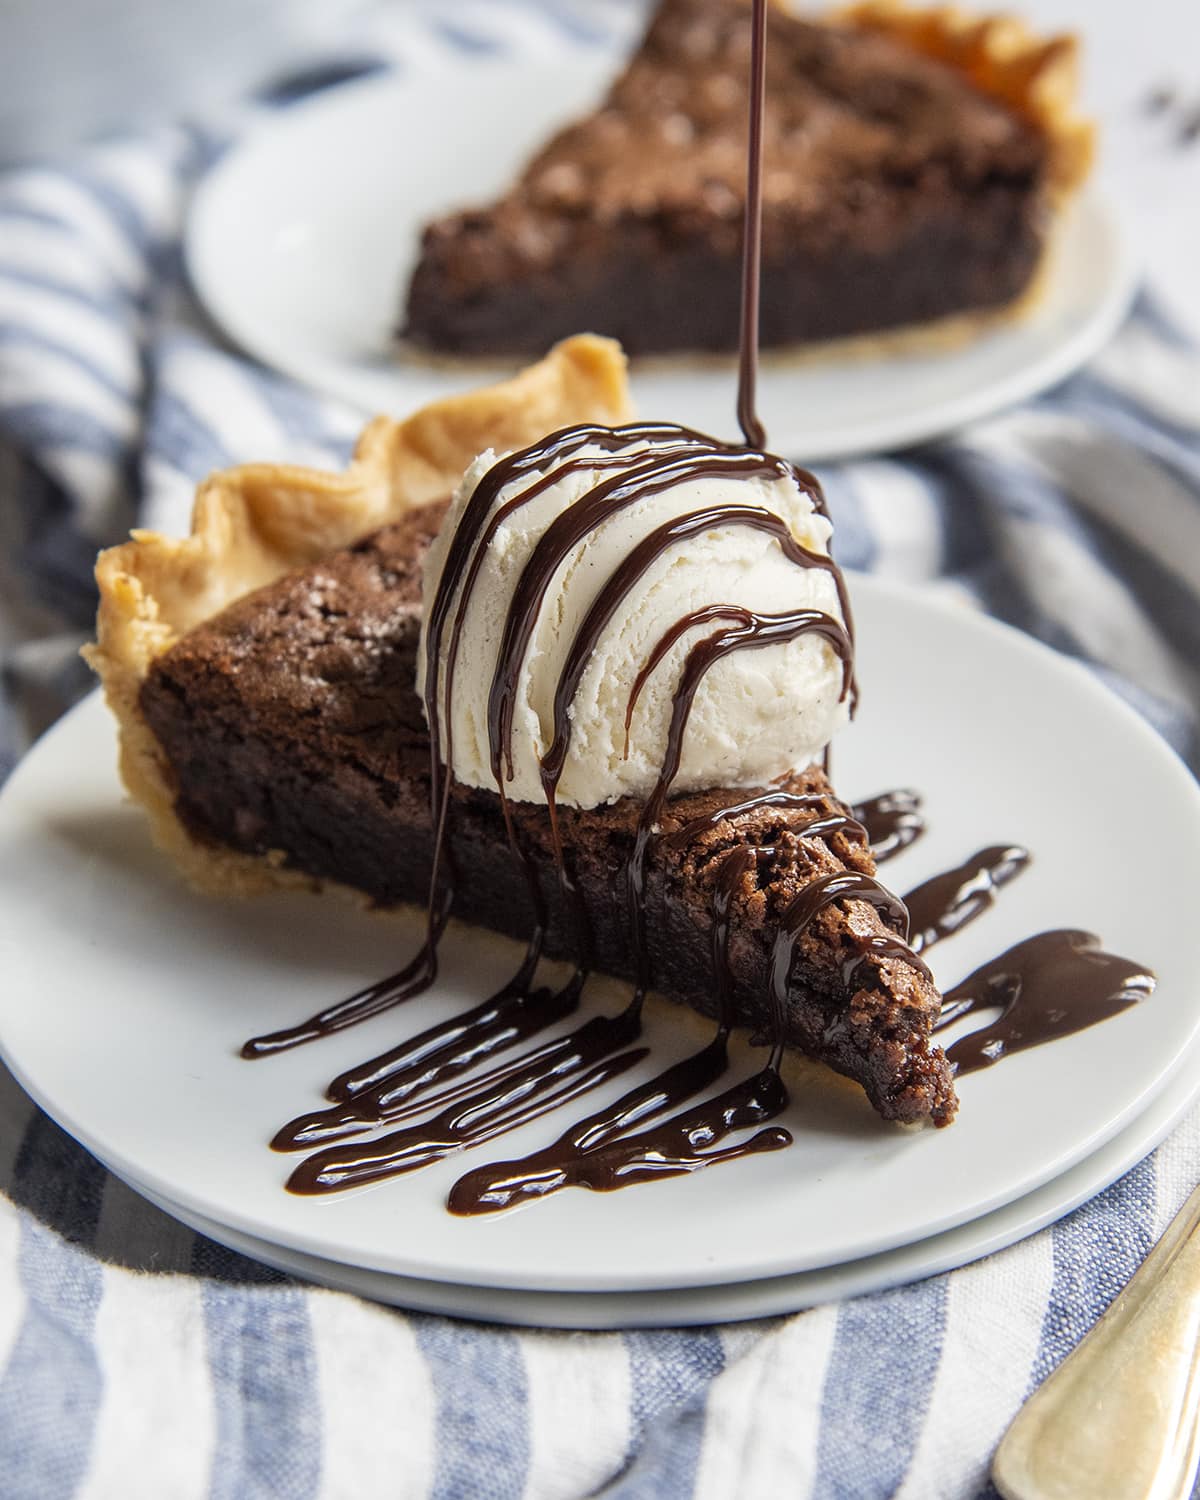 A slice of brownie pie on a plate, topped with ice cream, and chocolate sauce being drizzled over them both.